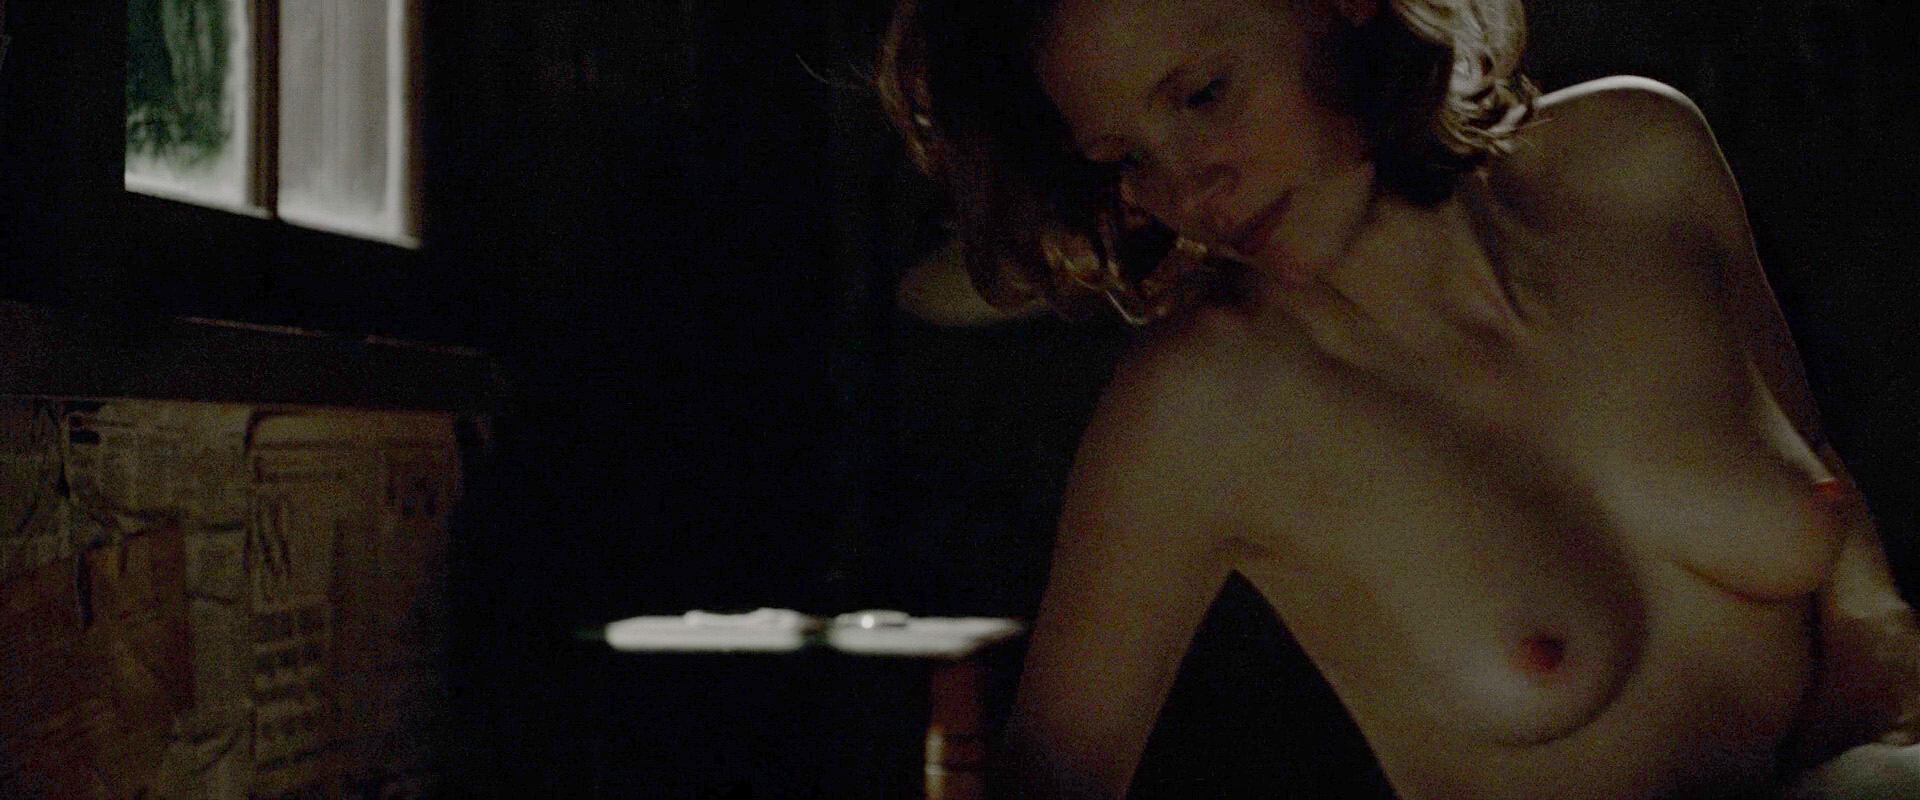 Jessica Chastain - Lawless (2012) HD 1080p